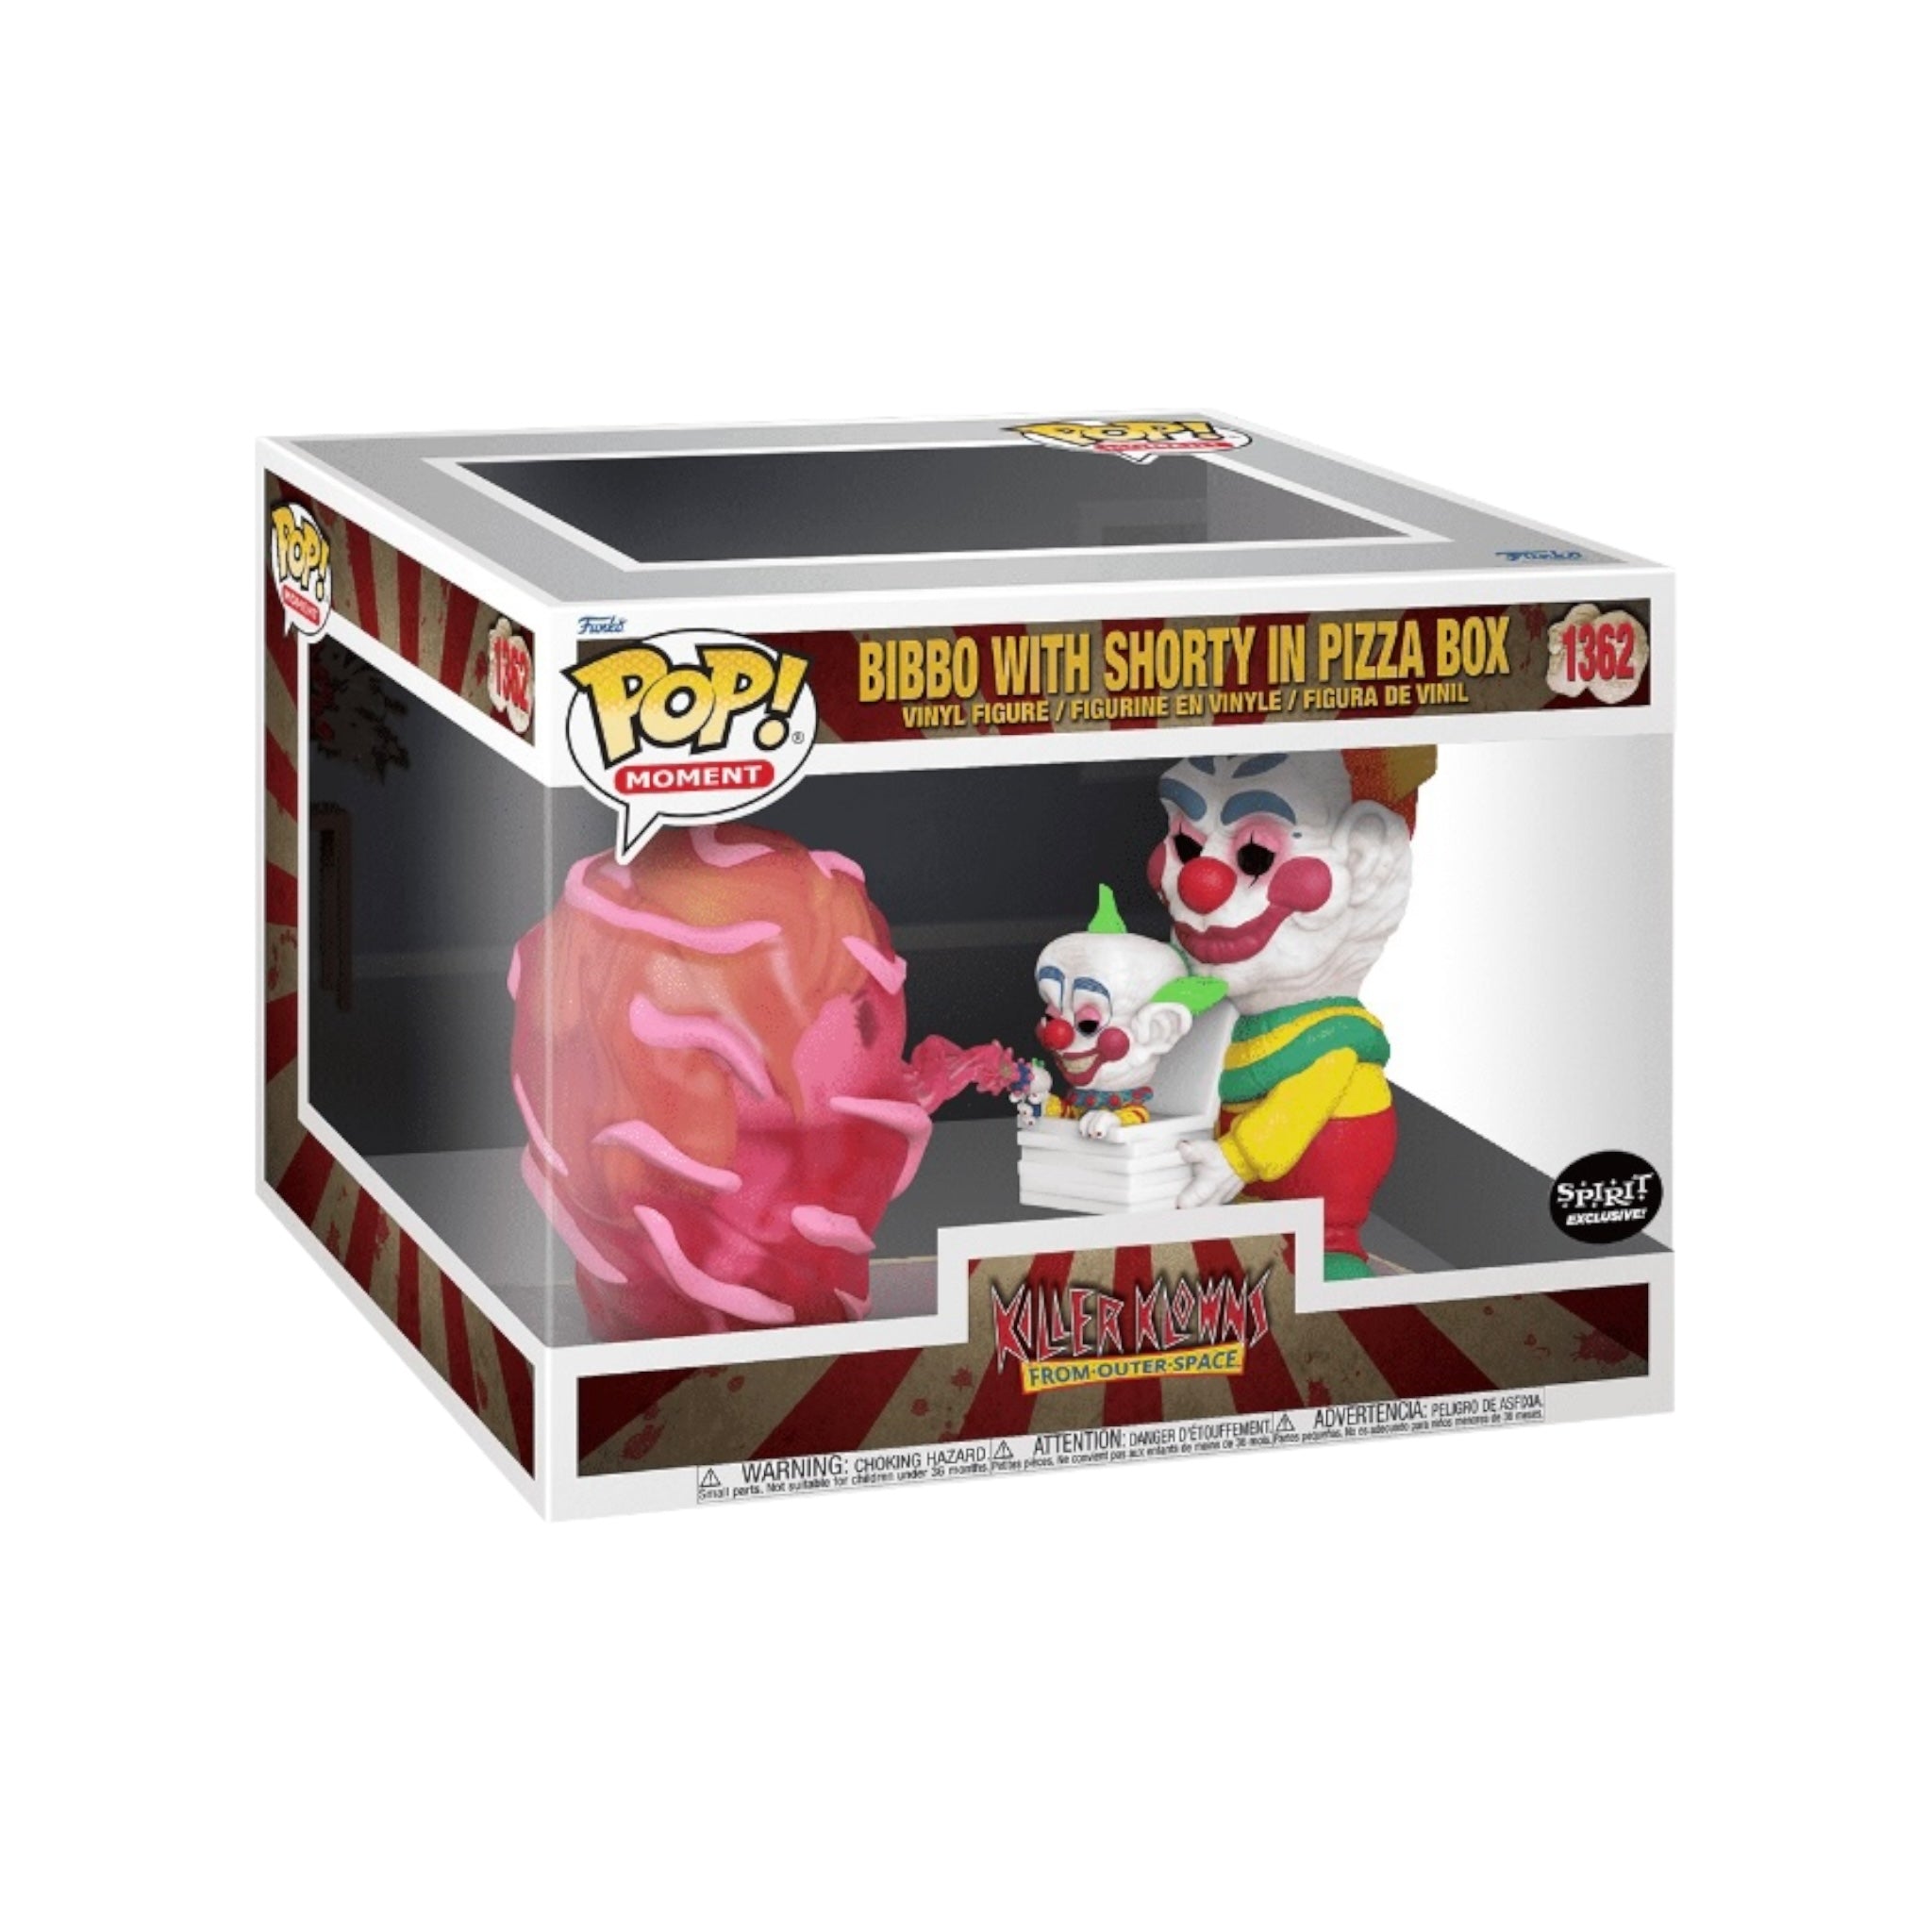 Bibbo with Shorty in Pizza Box #1362 Funko Pop Movie Moment! - Killer  Klowns From Outer Space - Spirit Exclusive